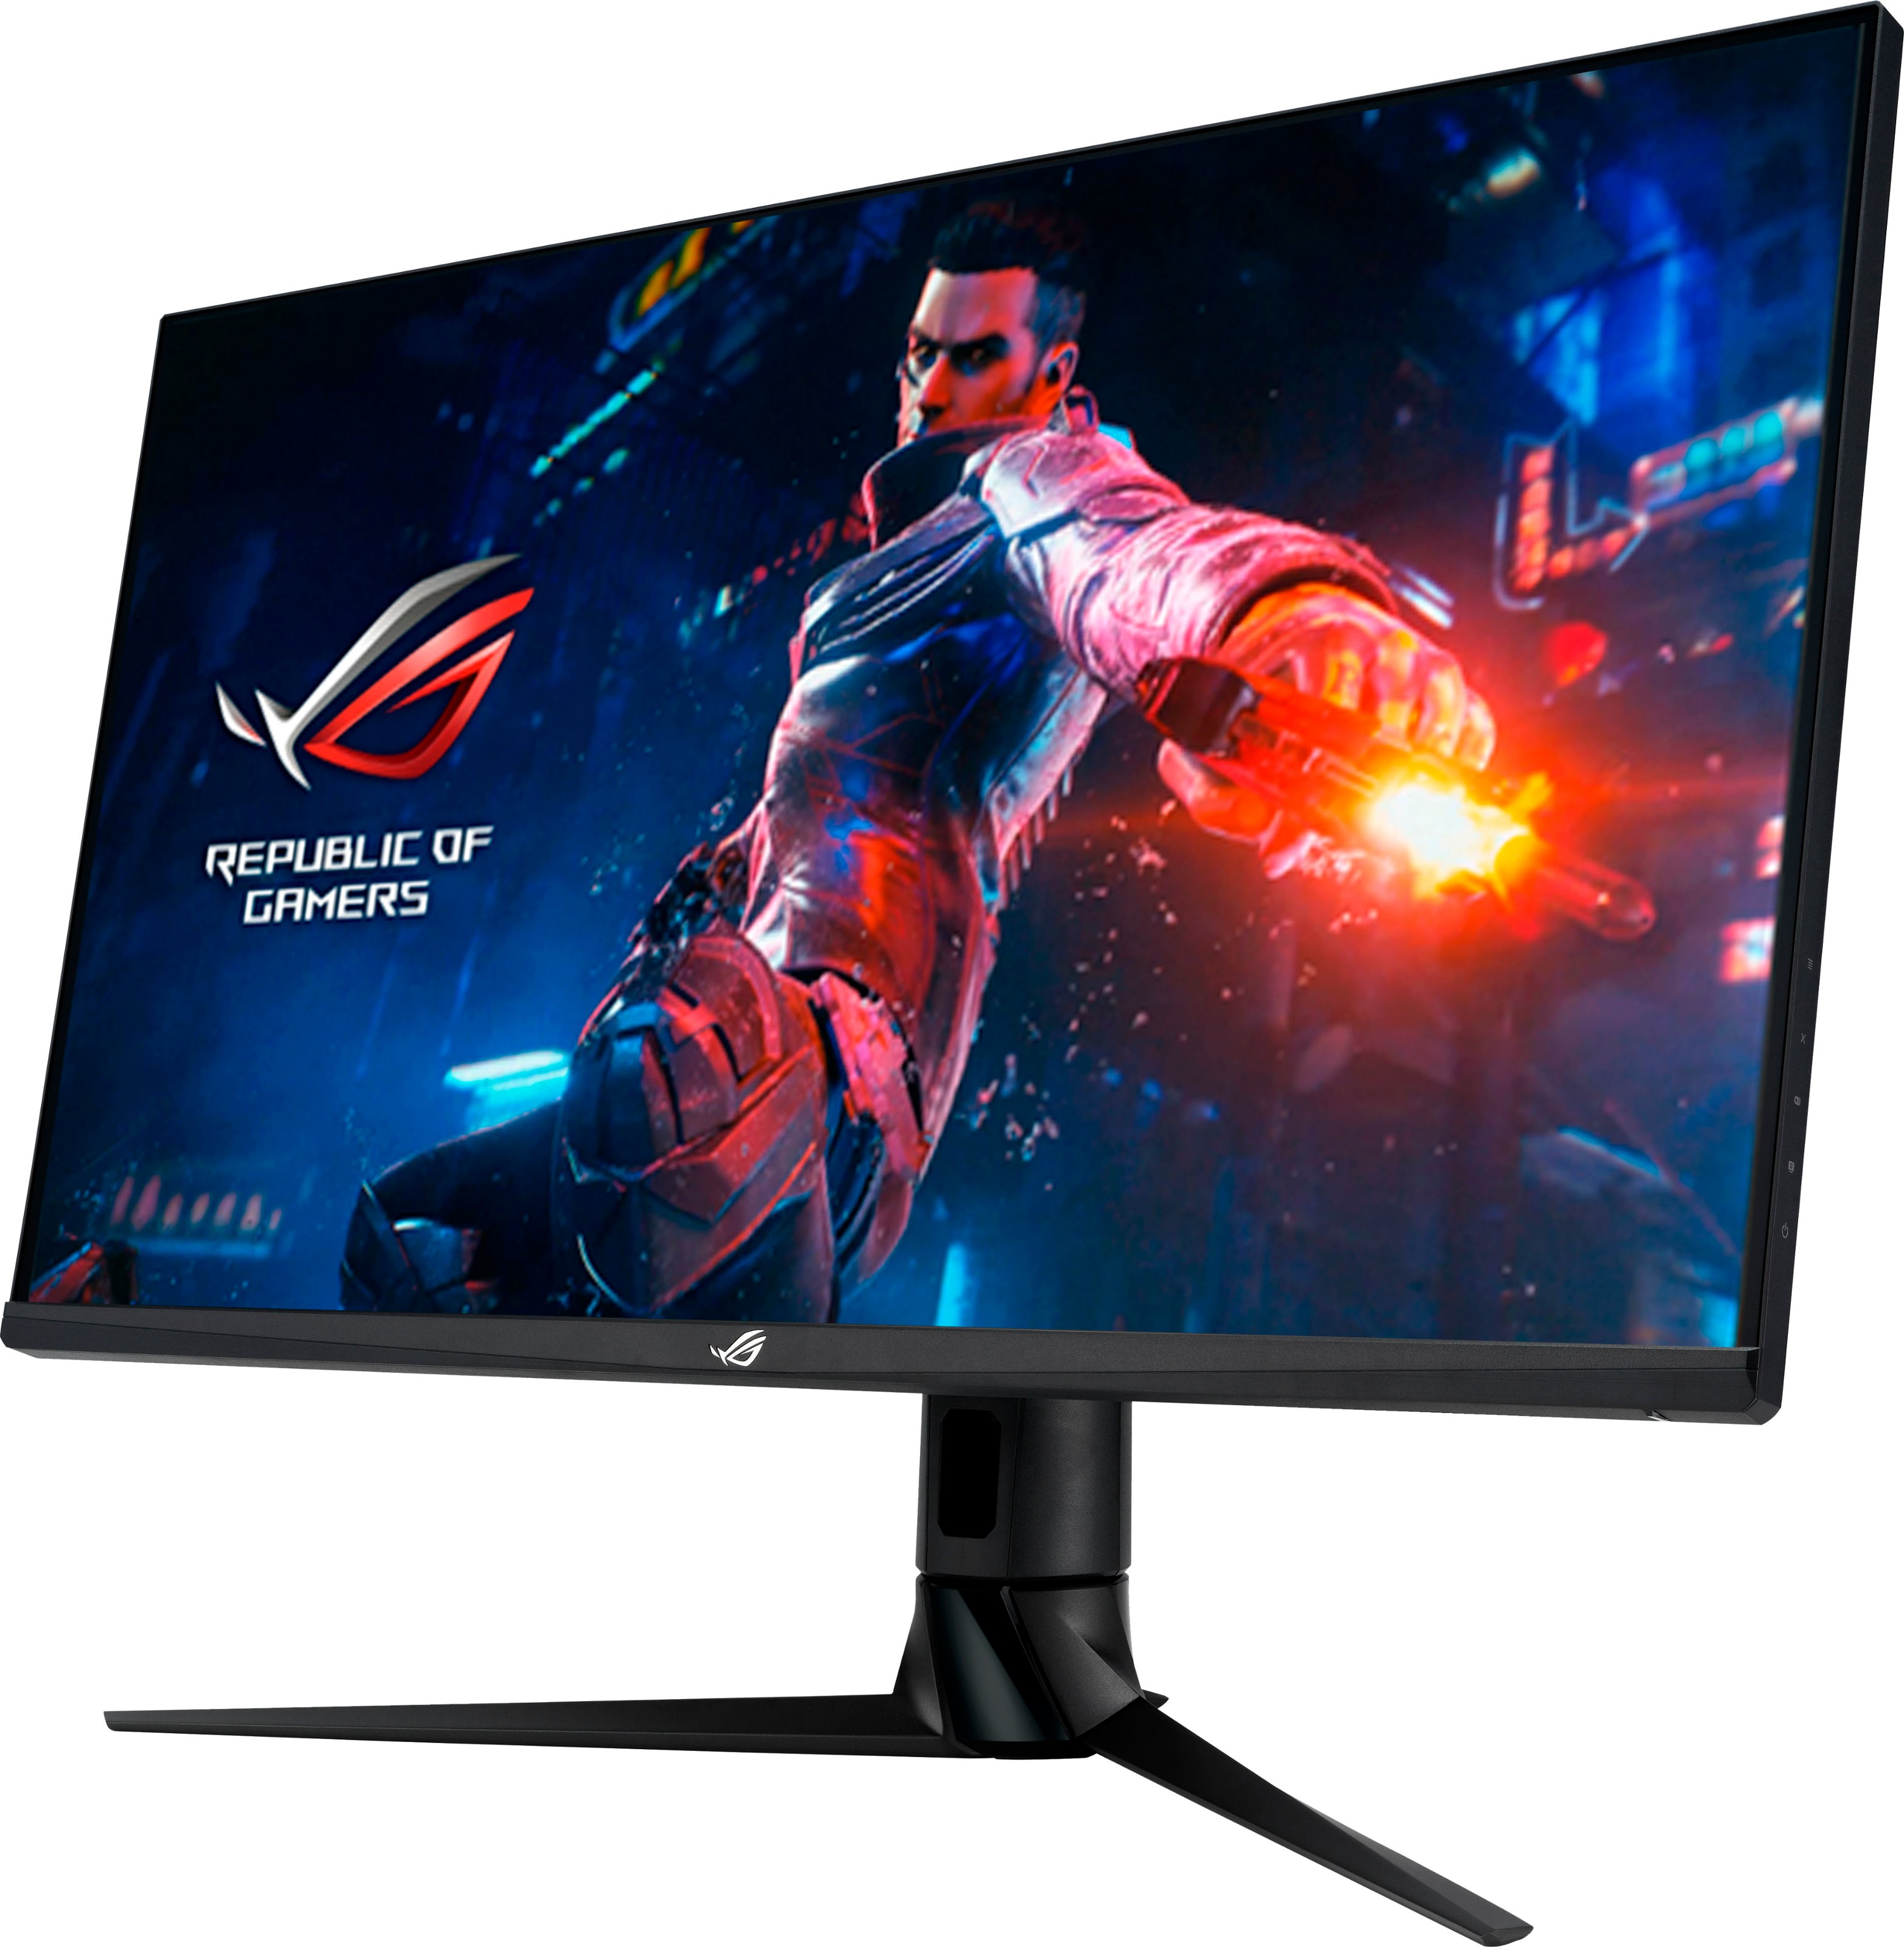 Angle View: ASUS - ROG Swift 32” IPS 4K 144Hz HDMI 2.1 1ms G-SYNC Gaming Monitor with HDR (DisplayPort,USB)